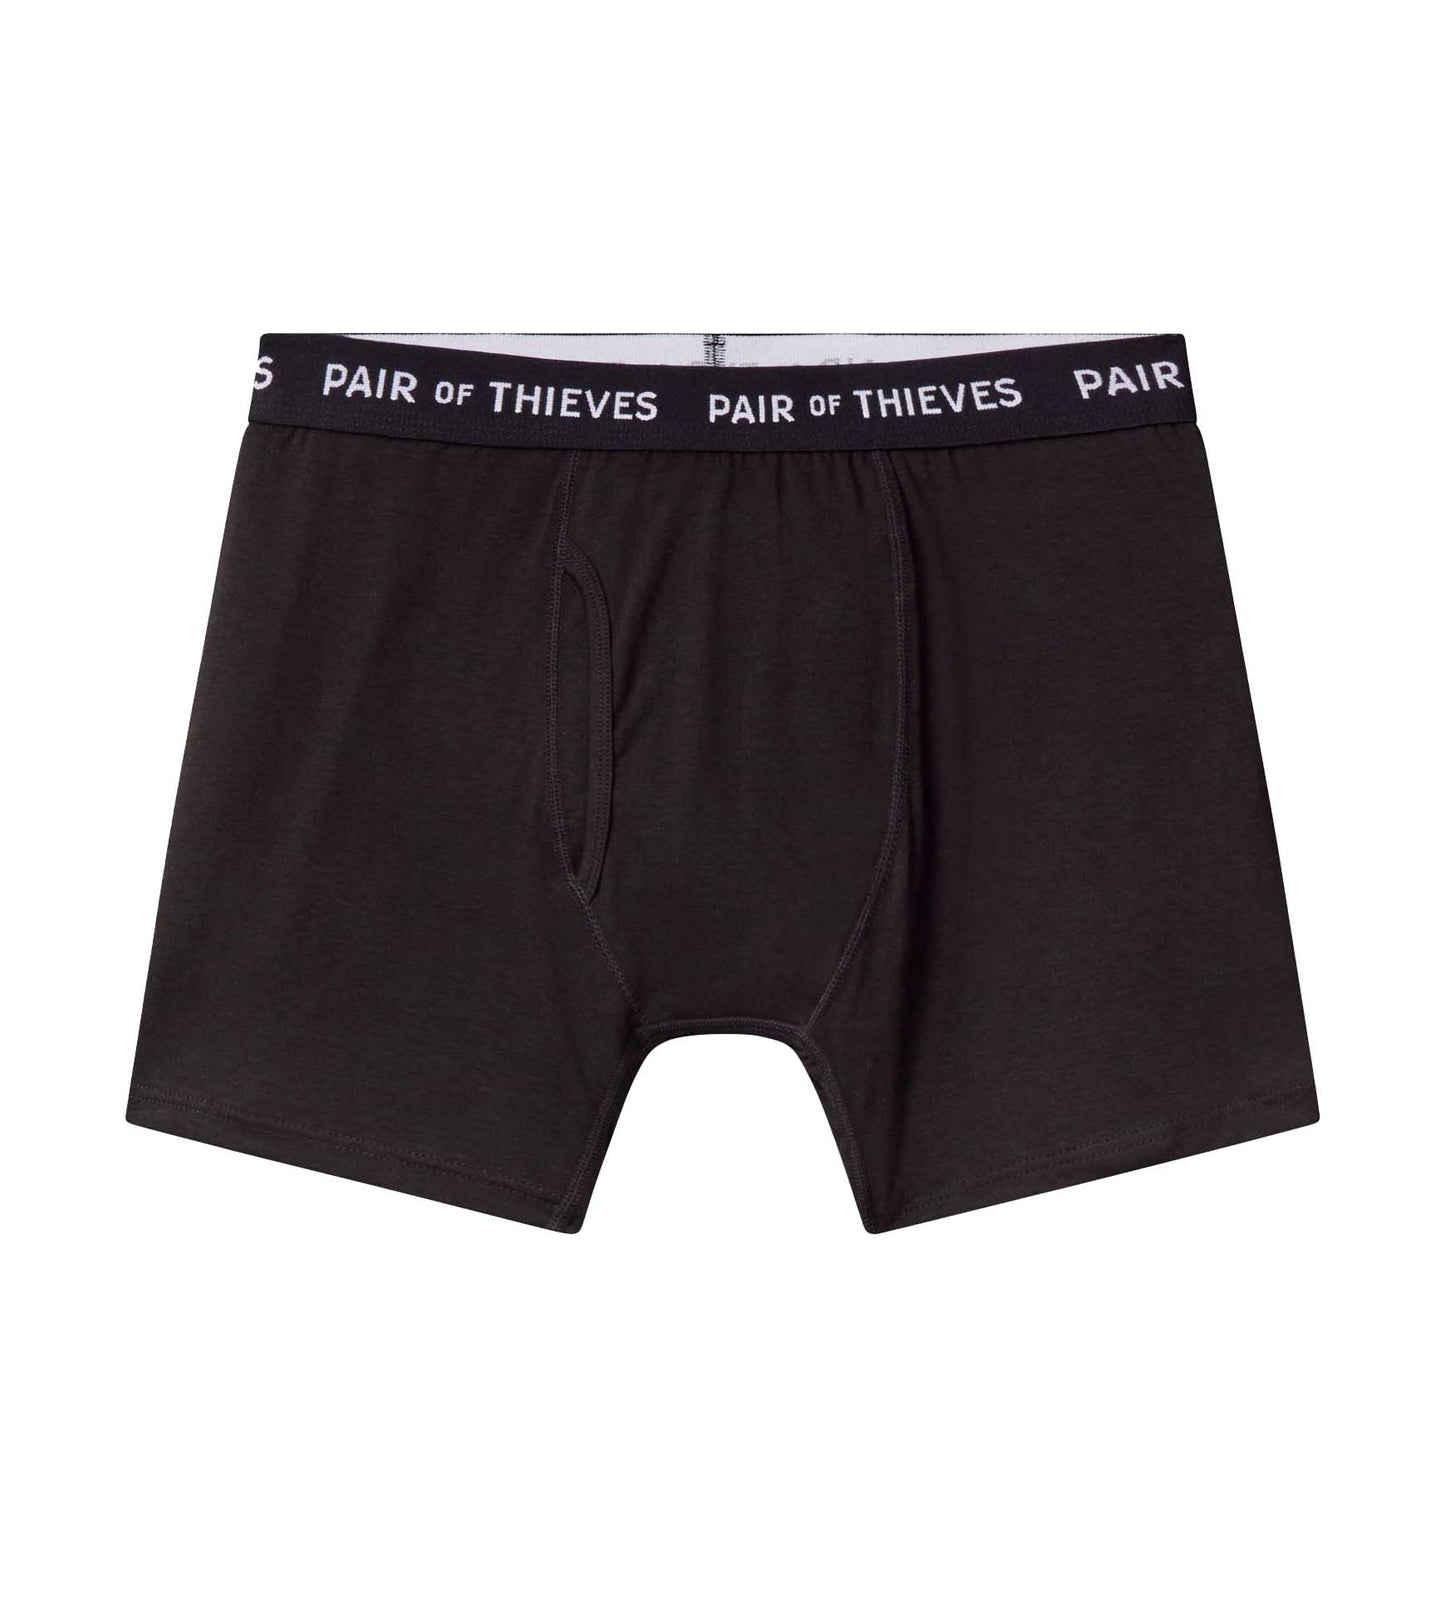  Pair of Thieves Men's Pride And Peace Trunk, White